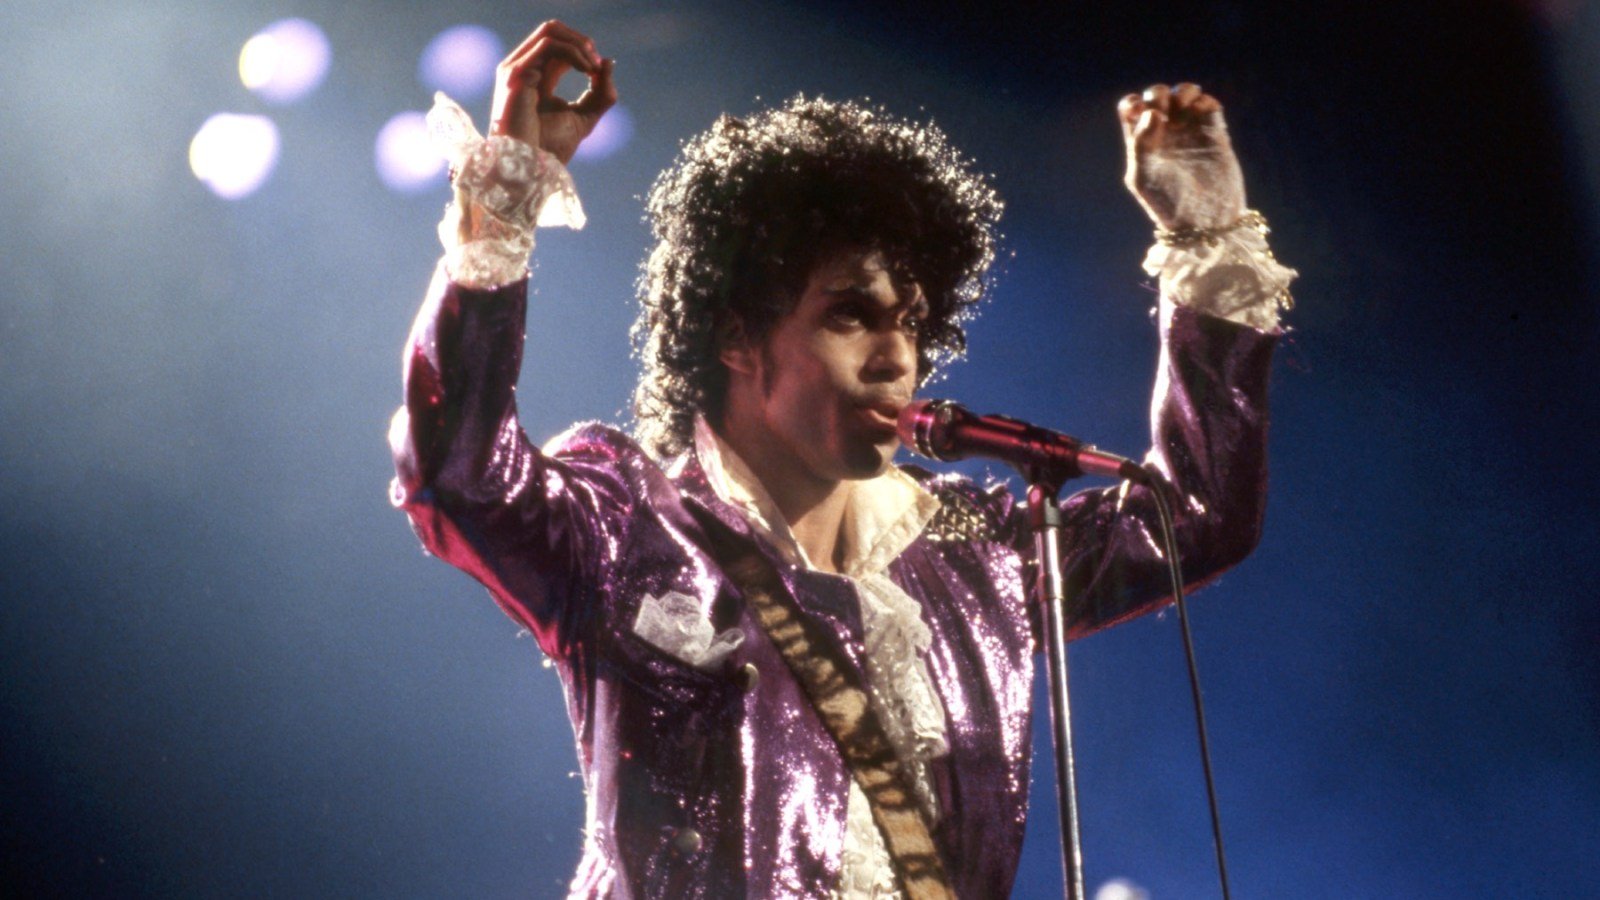 Prince's 'Purple Rain' is being adapted for the stage